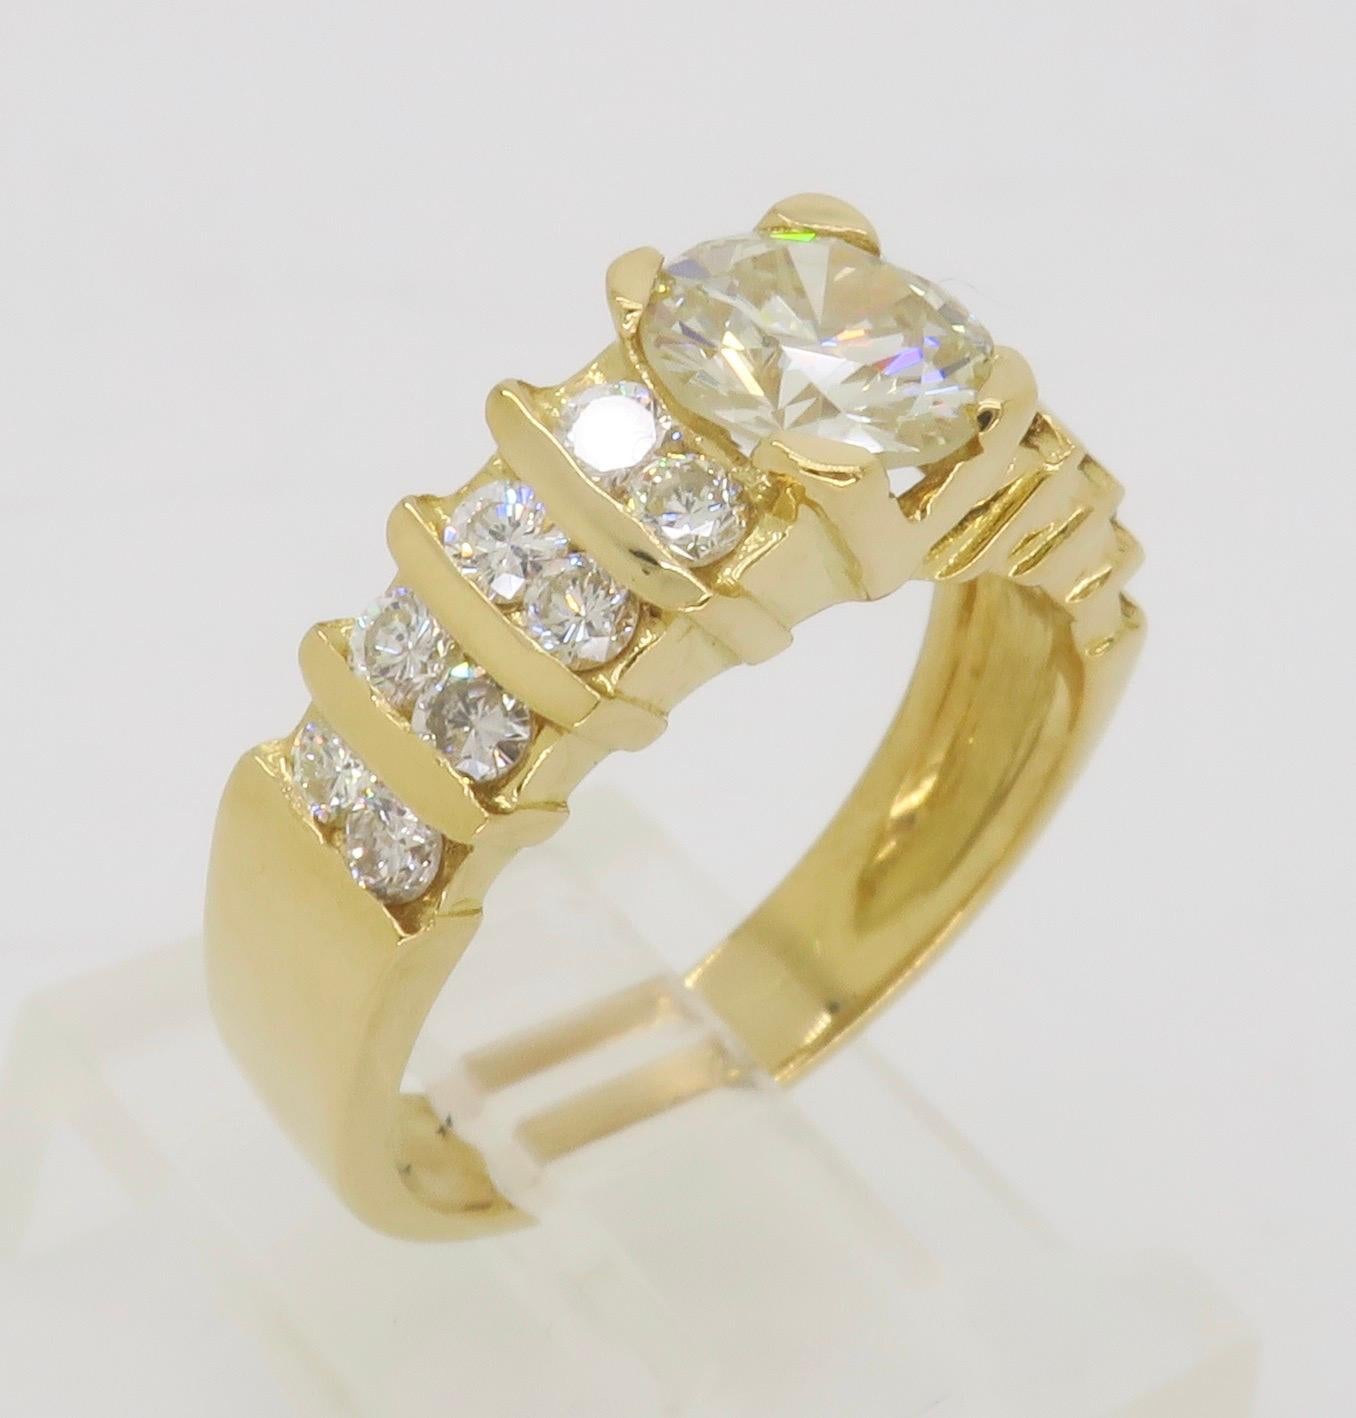 1.54ctw Diamond Encrusted Ring in 14k Yellow Gold For Sale 8